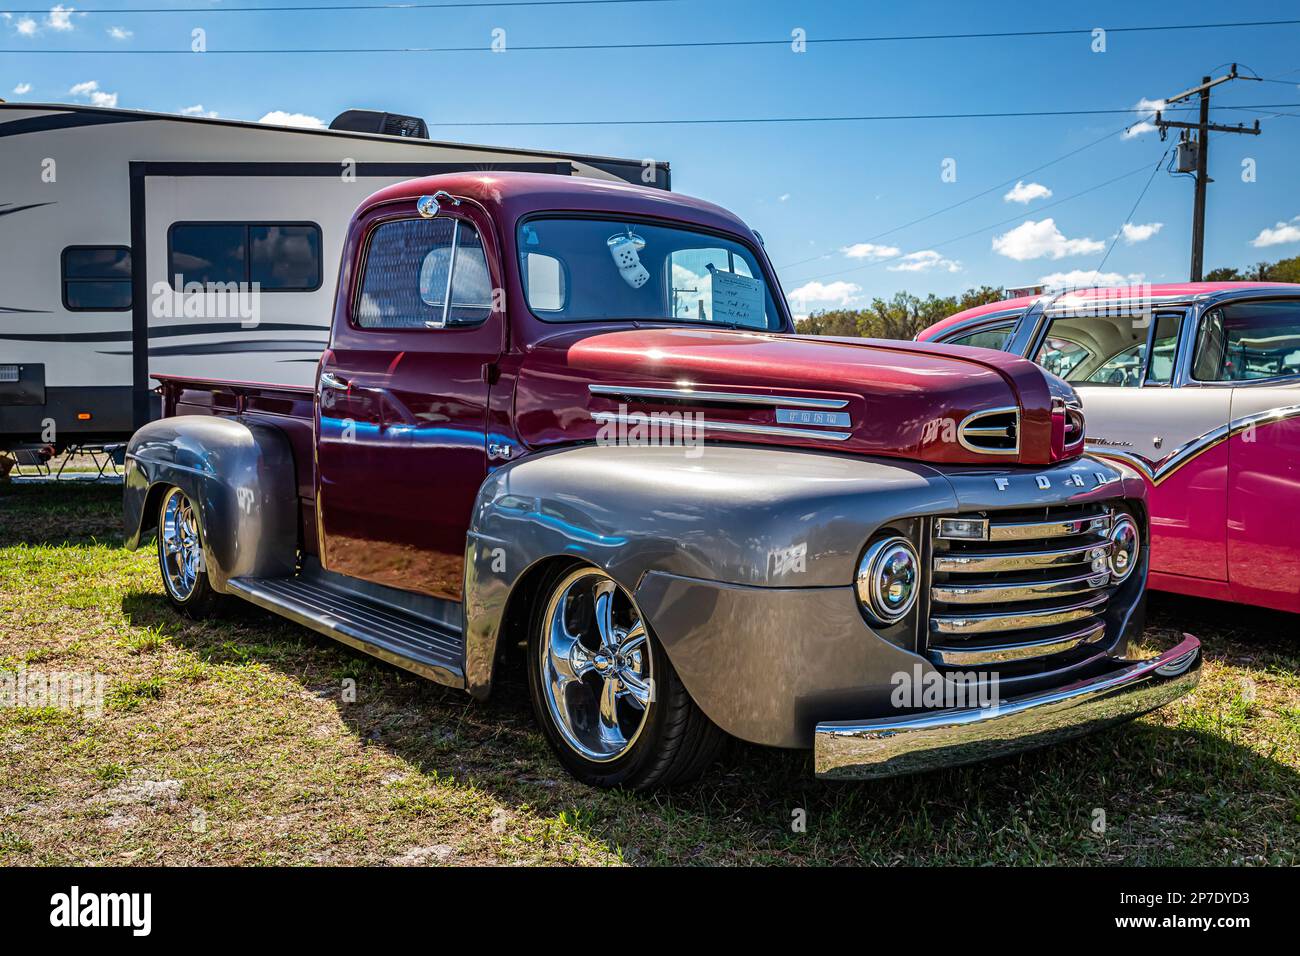 Fort Meade, FL - February 24, 2022: High perspective front corner view of a 1948 Ford F1 Pickup Truck at a local car show. Stock Photo